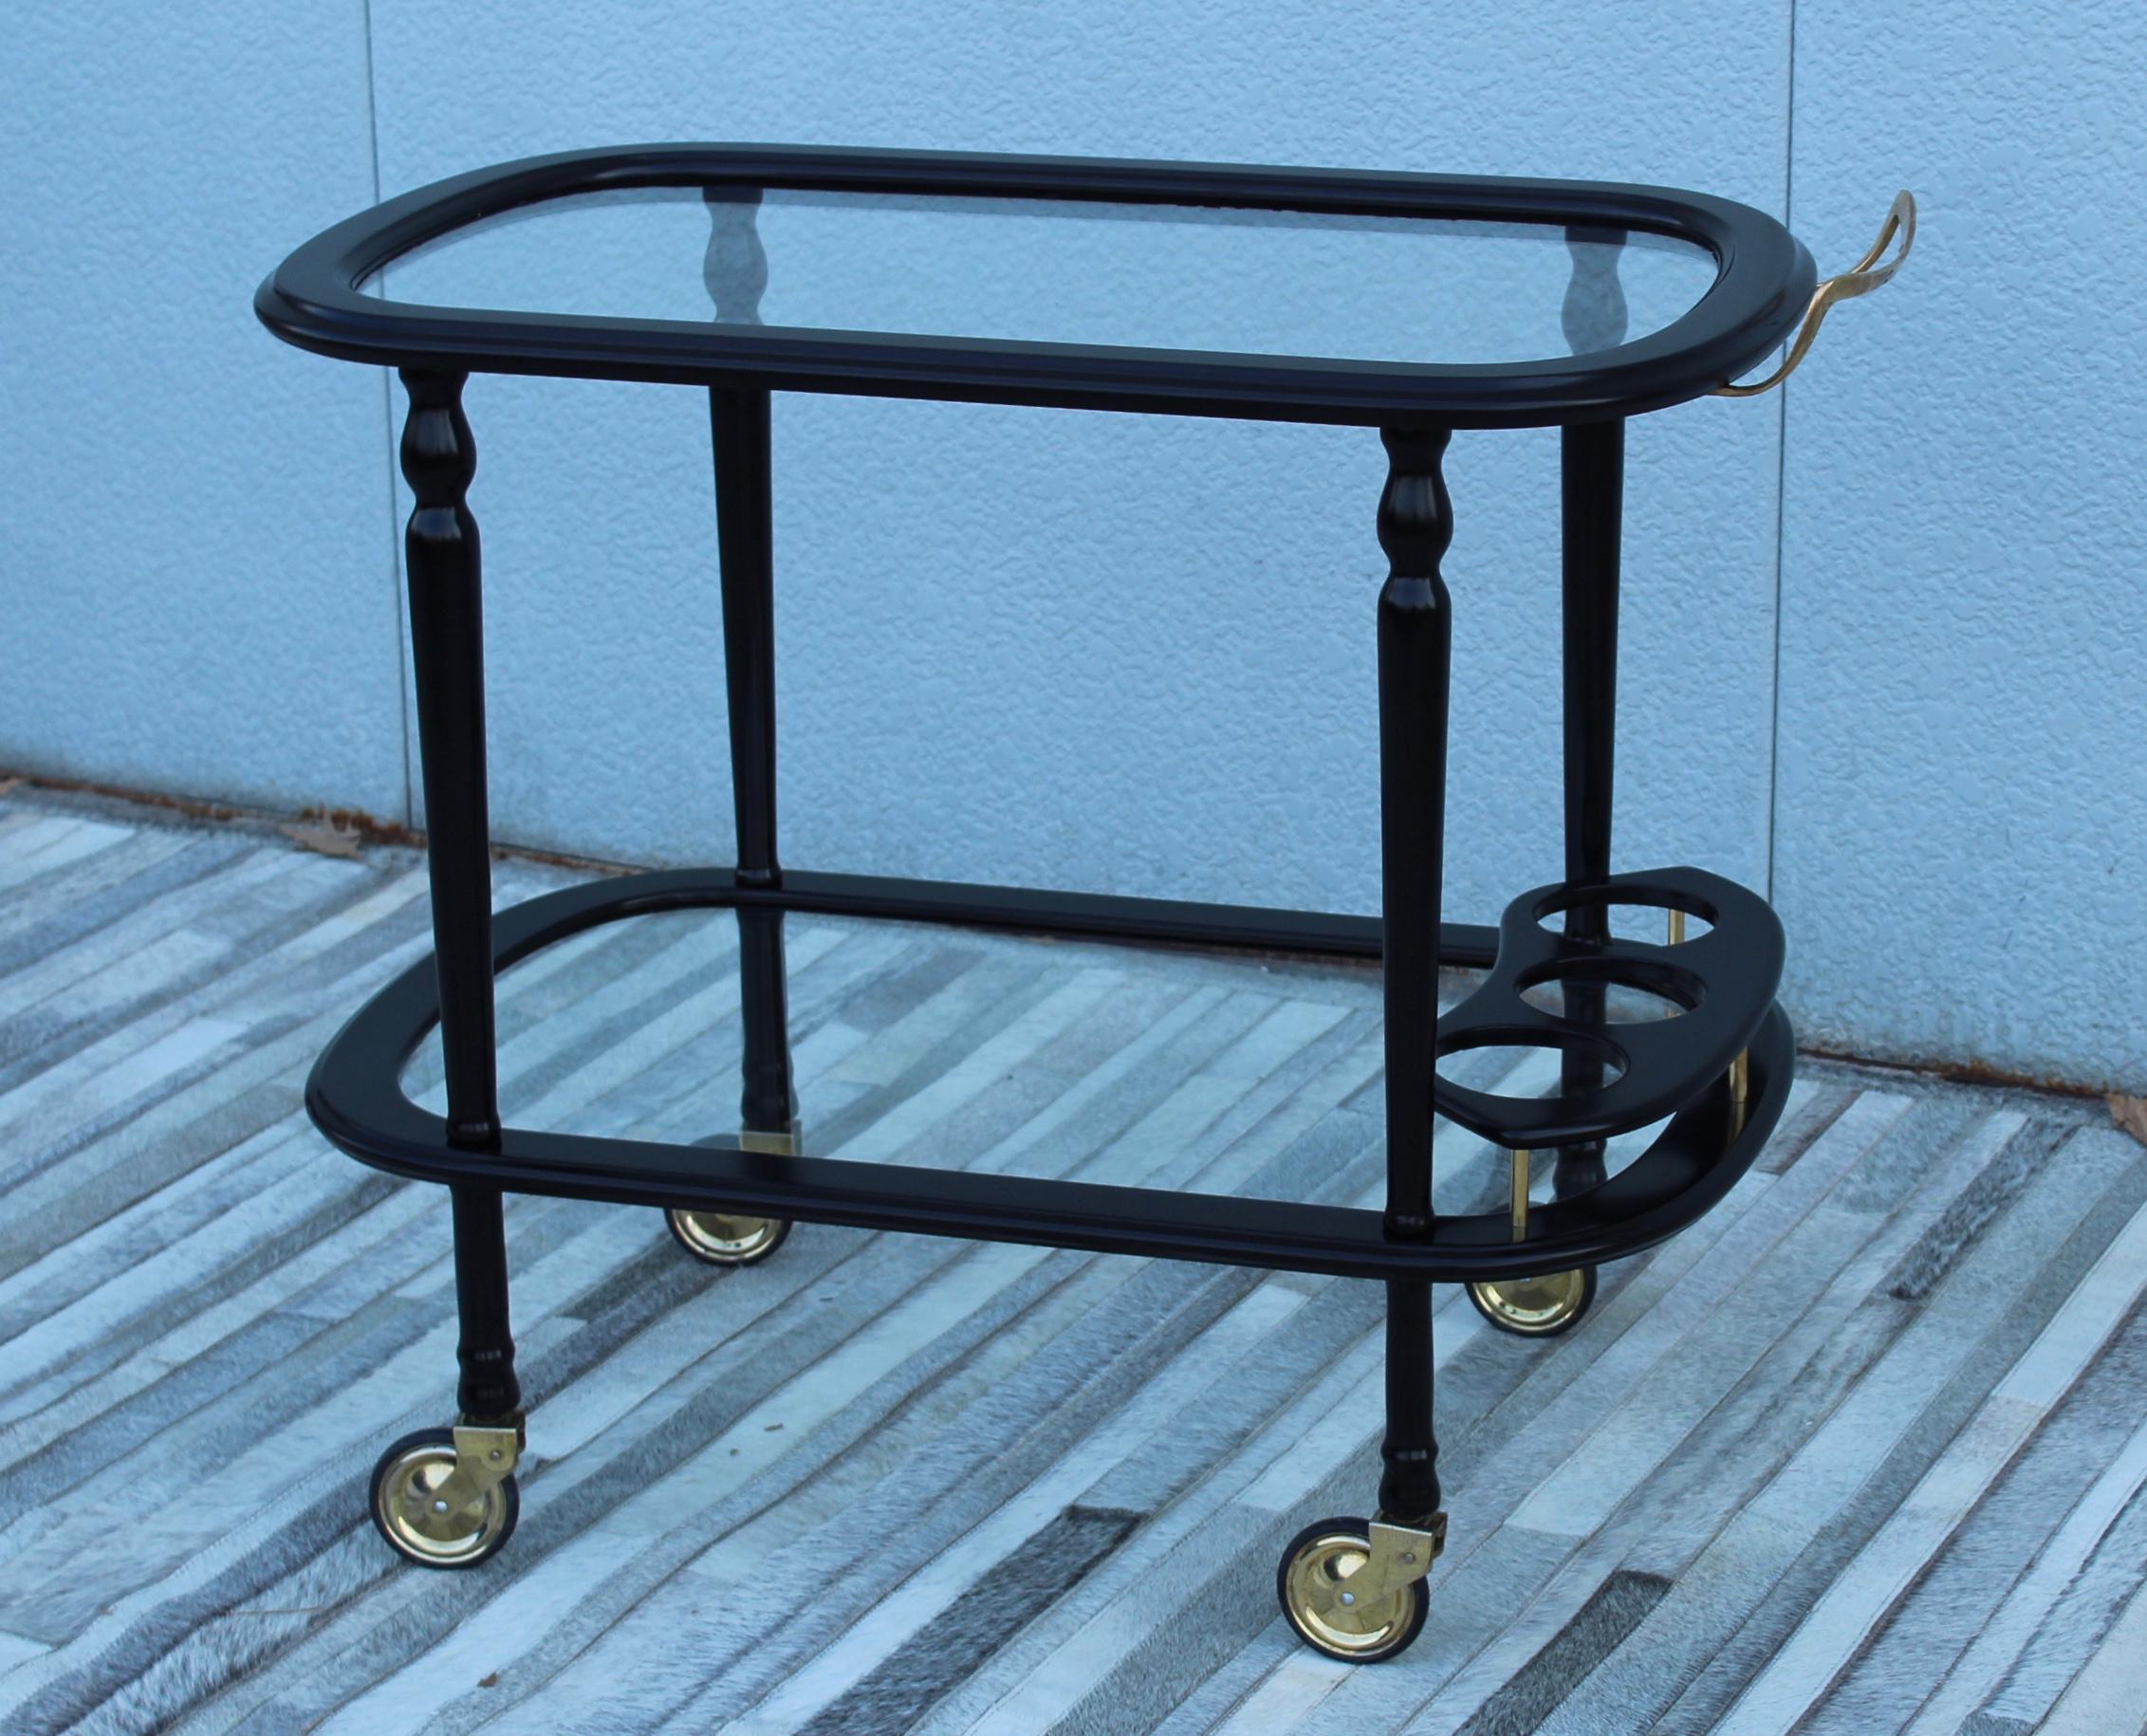 1950's Bar cart designed by Ico Parisi for Angelo De Baggis & Fliglio, in vintage newly lacquered in black with some wear and patina due to age and use.